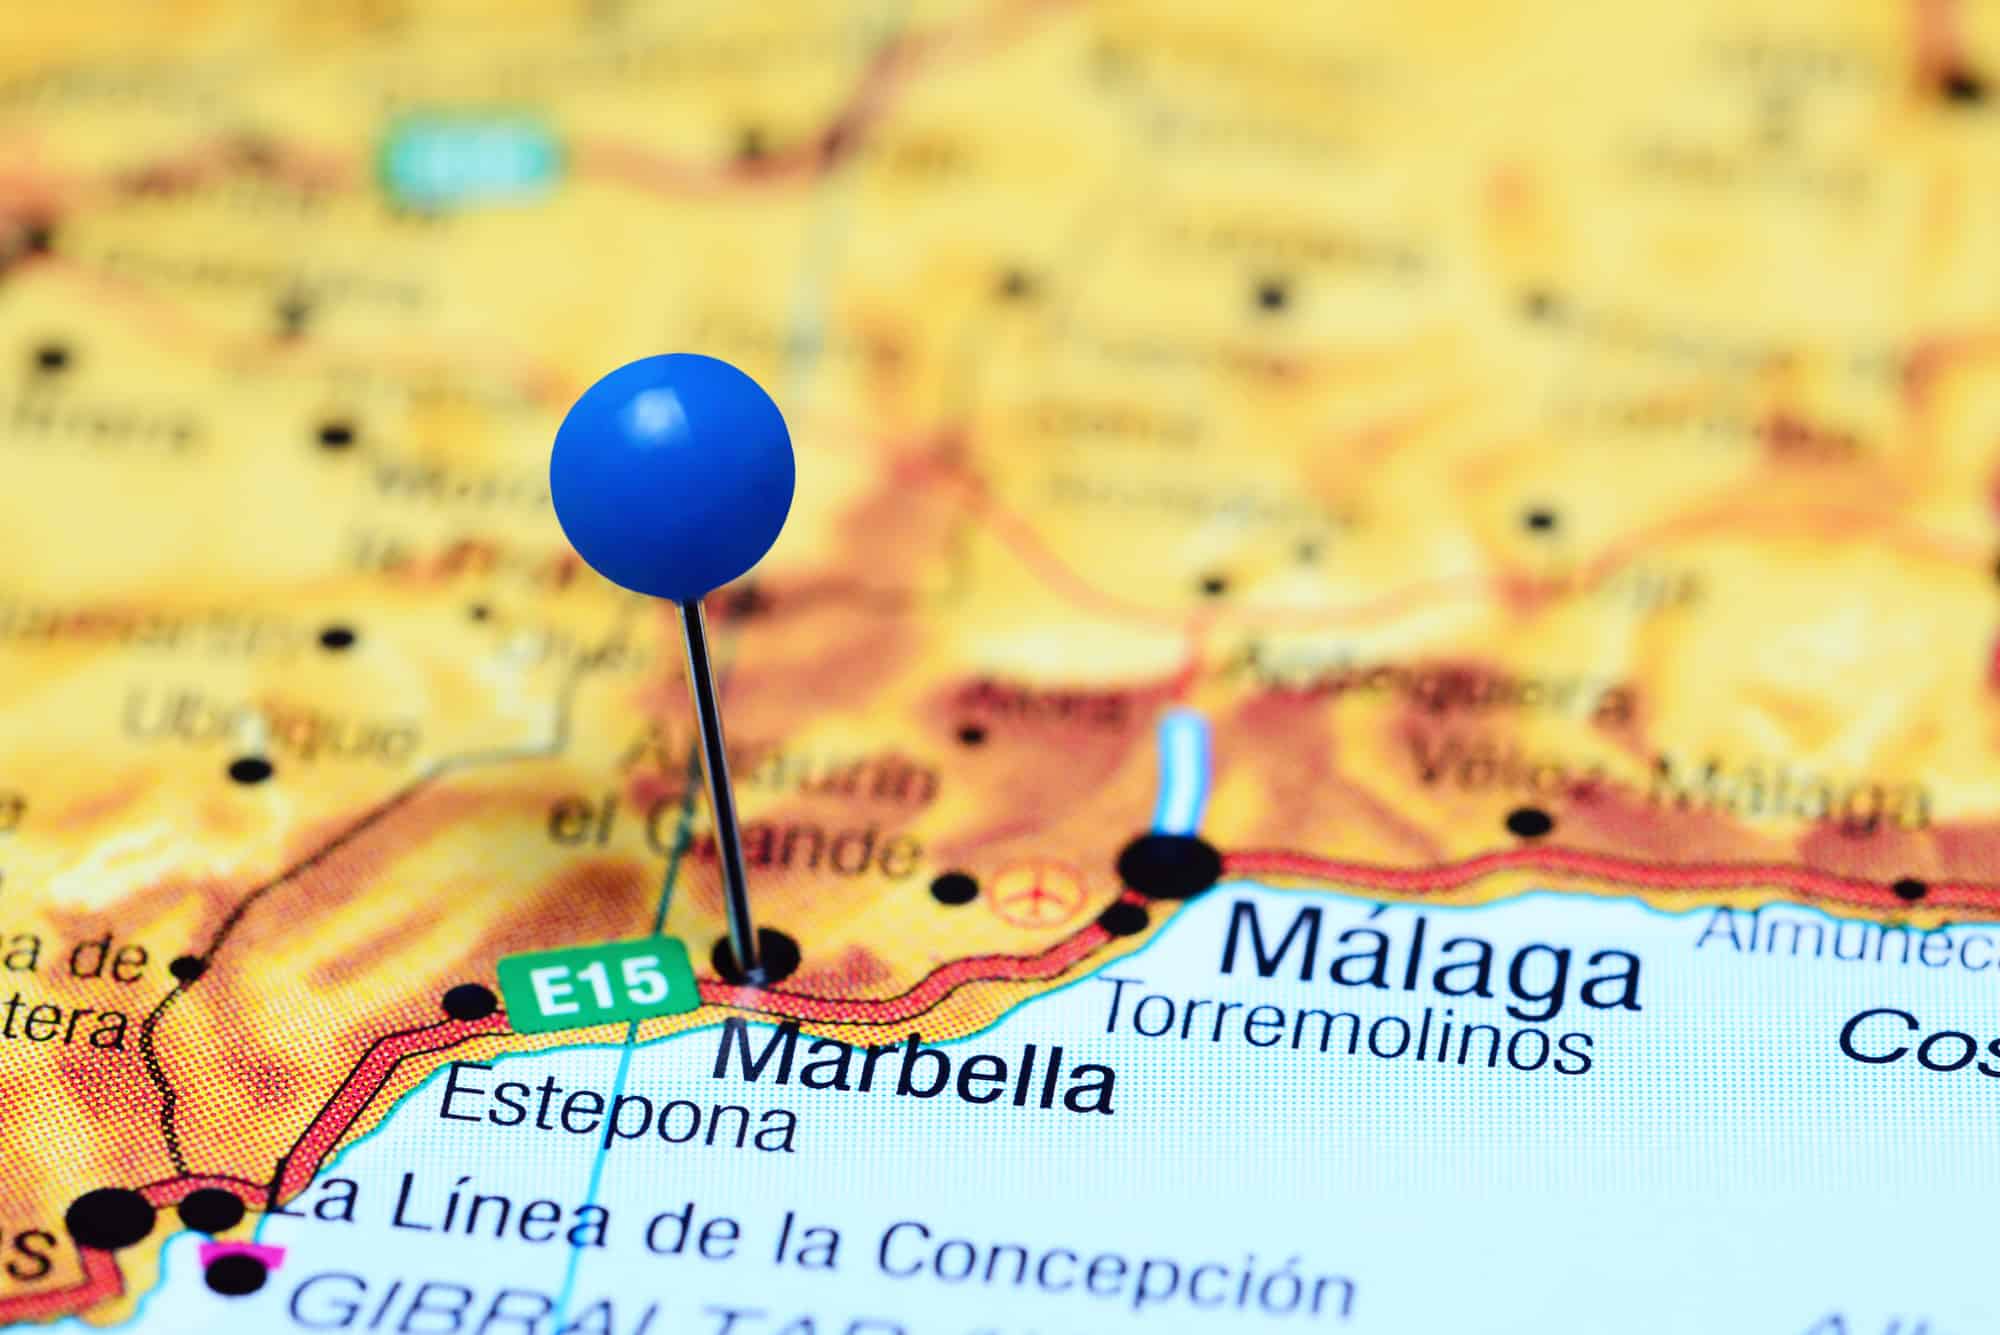 How to Get From Malaga to Marbella